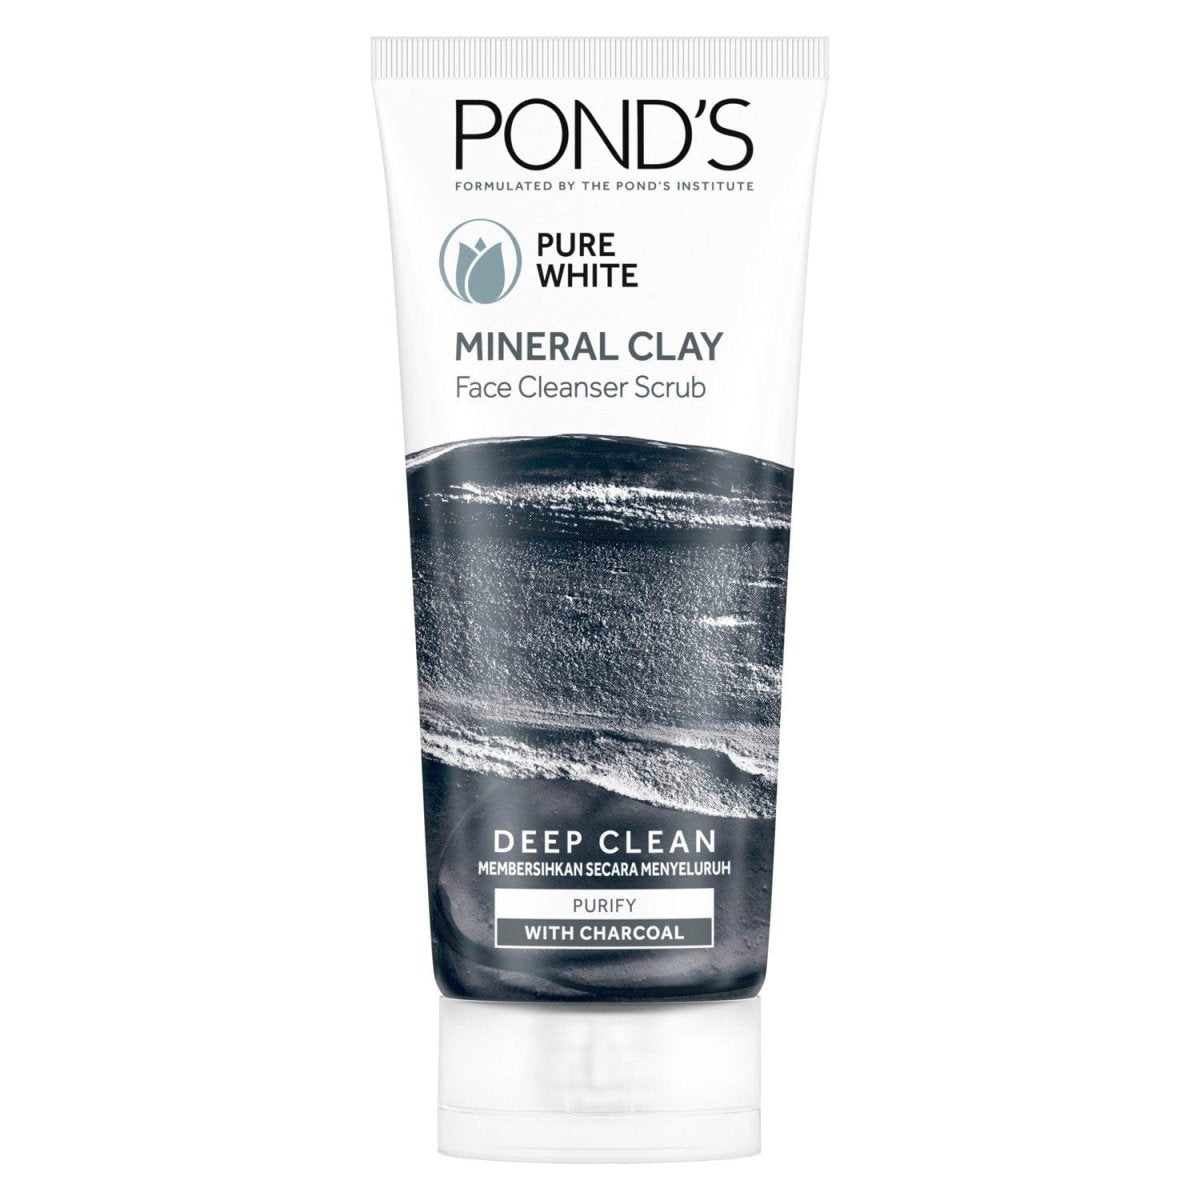 Ponds Pure White Mineral Clay Face Cleanser Scrub 90g